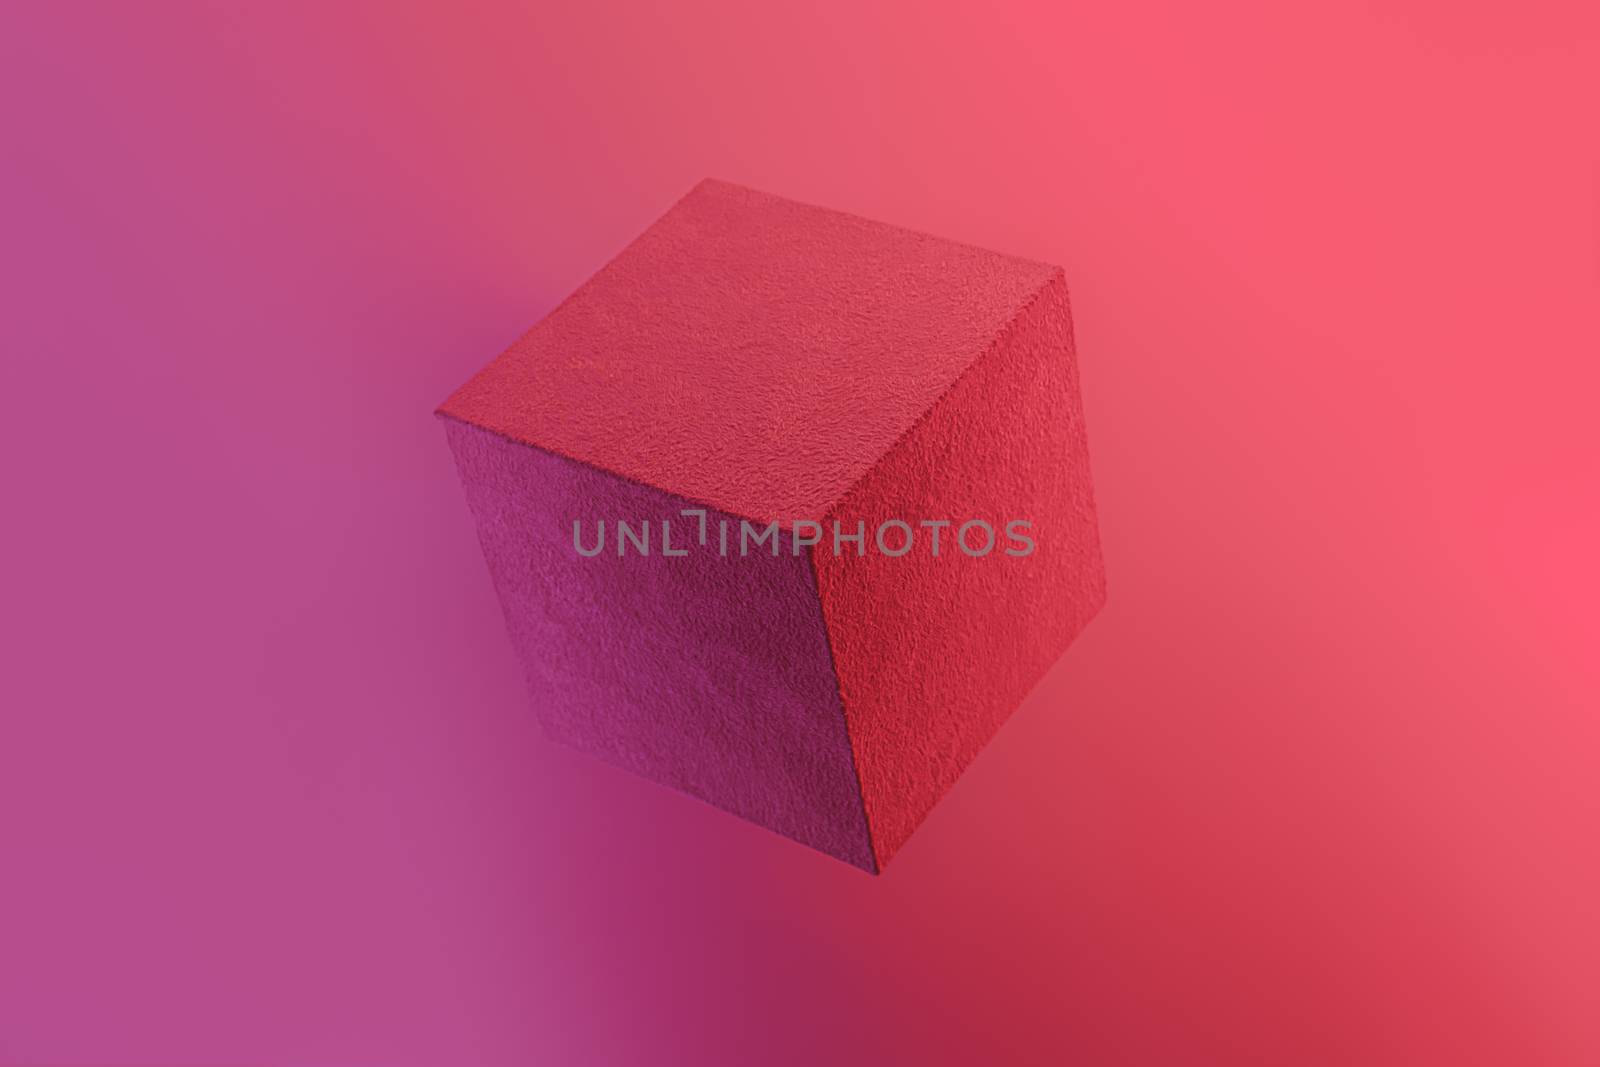 Geometric cube figure in vibrant neon colors. Vivid pink and red gradients, geometric shape, abstract concept